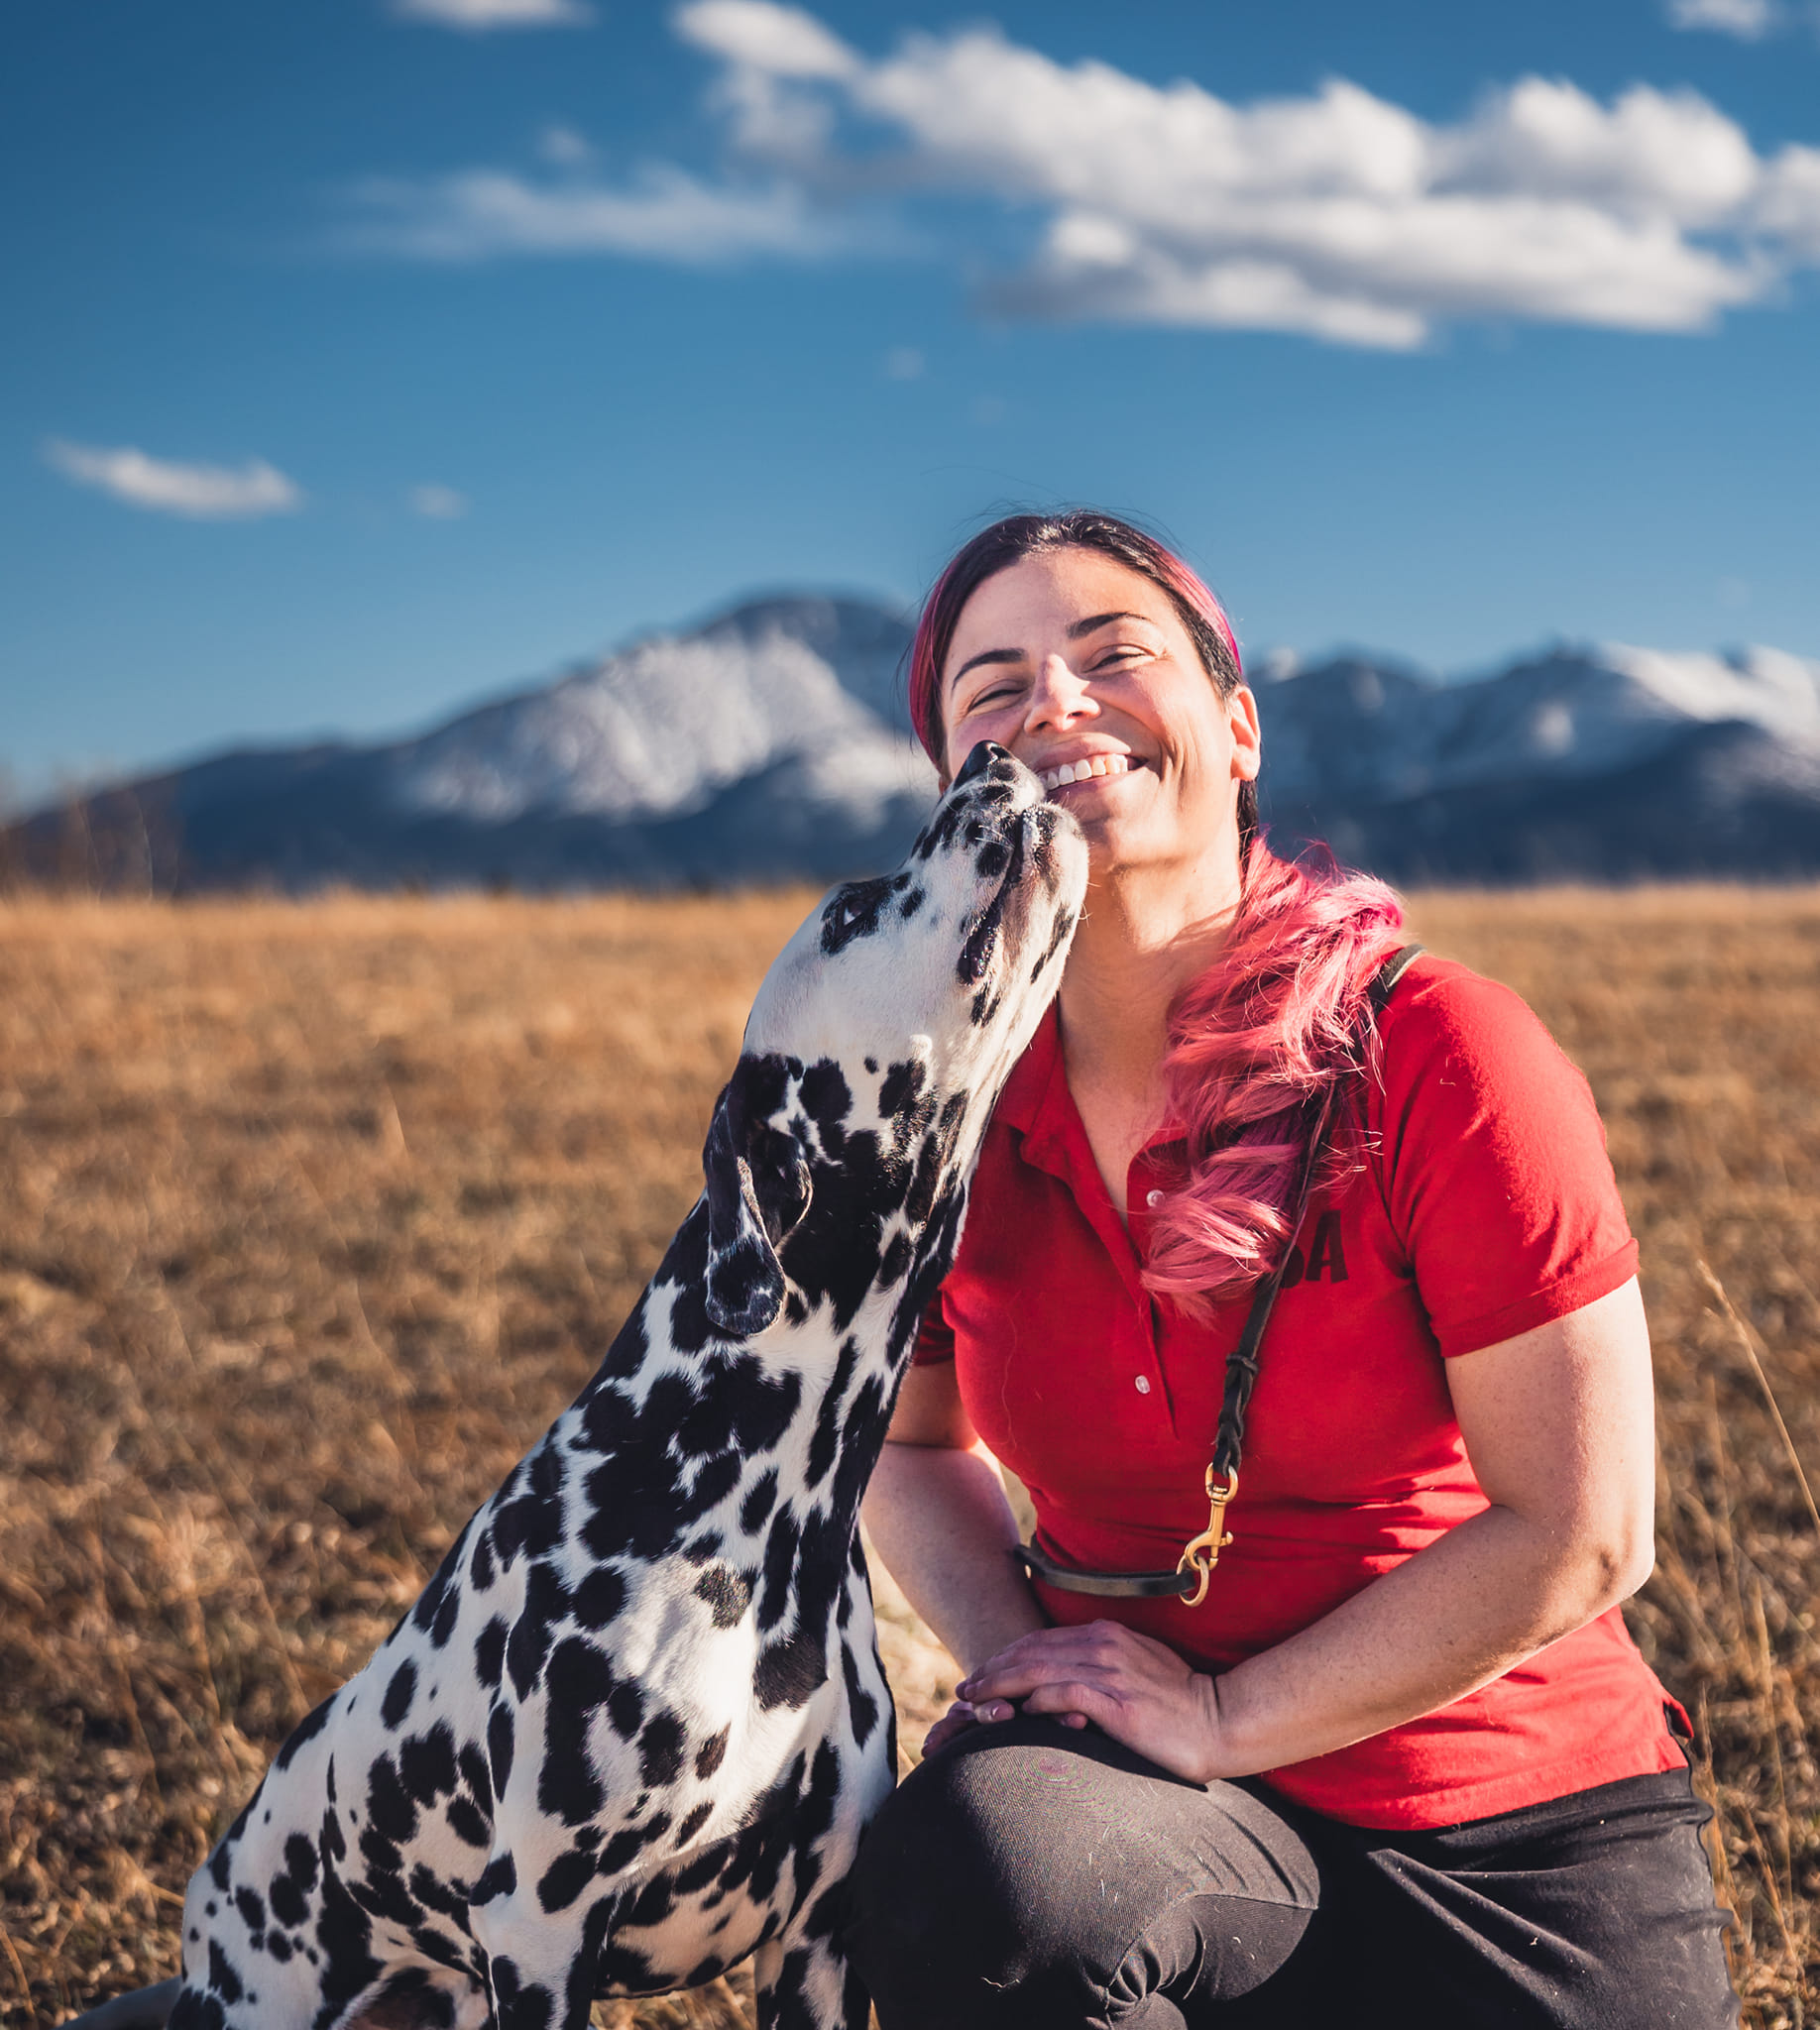 Dalmatian shows affection for its trainer in outdoor setting 